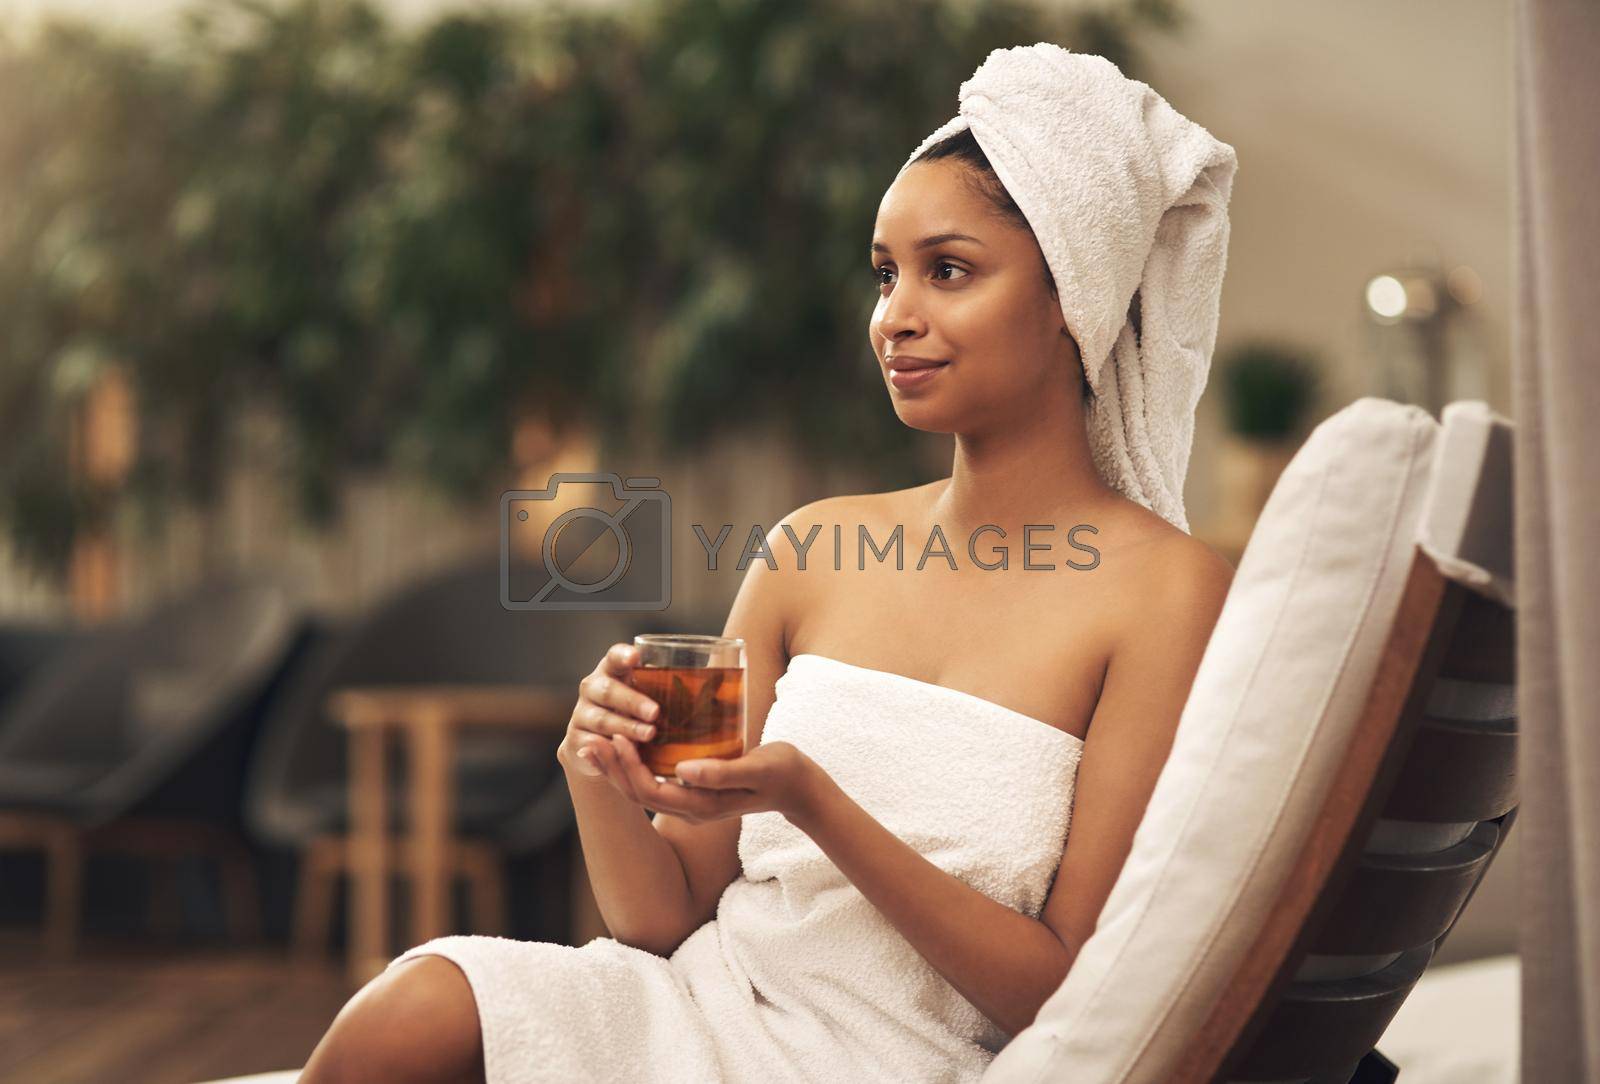 Shot of a woman drinking tea while enjoying a spa day.